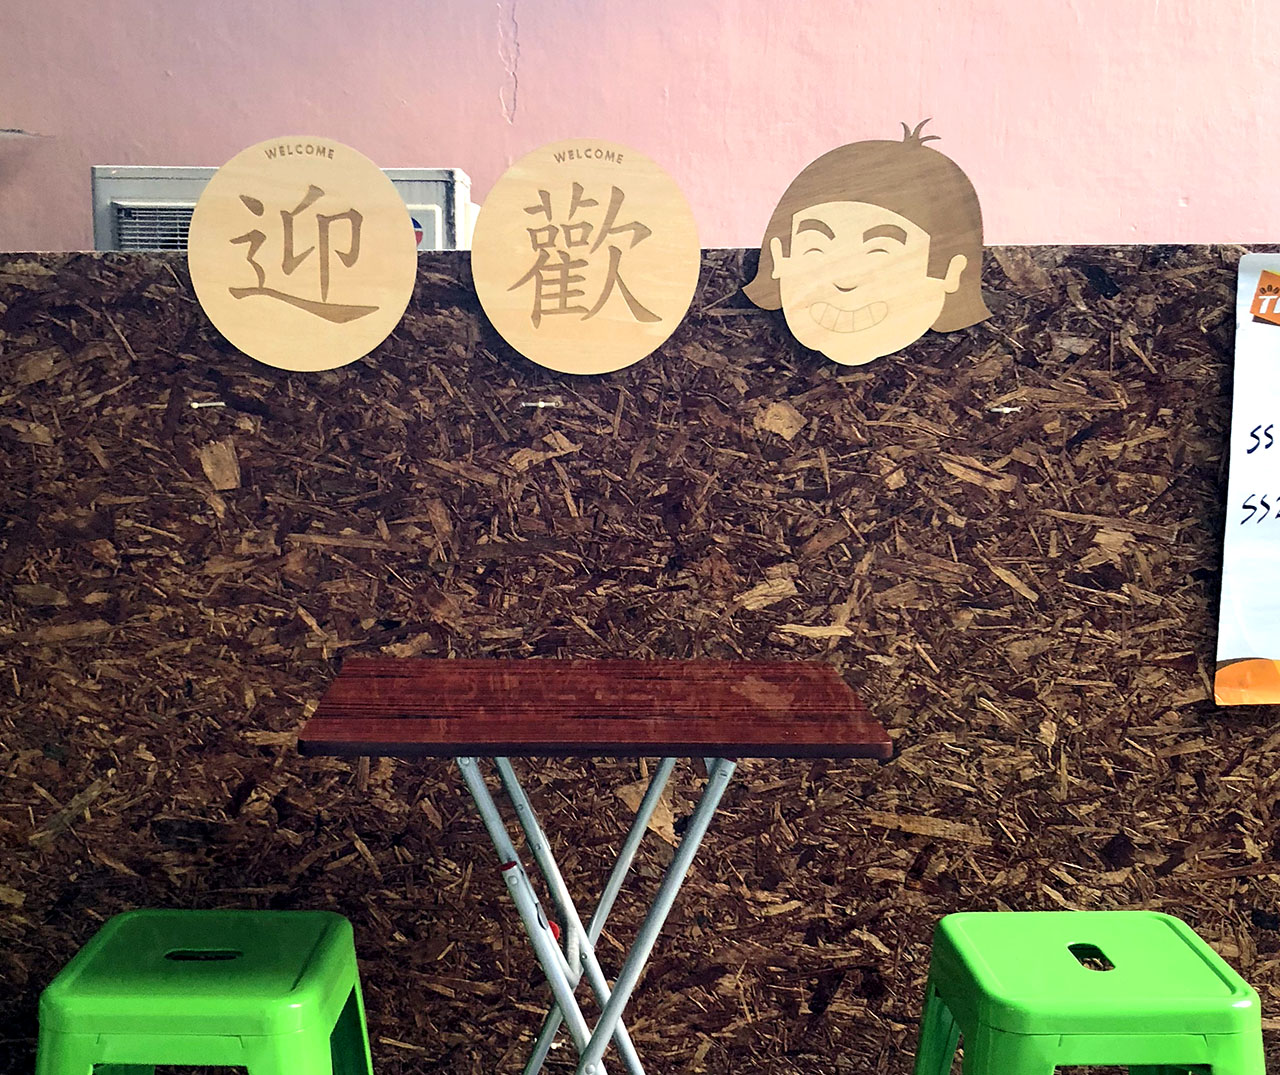 Outdoor seating showig two green stools, a foldable table, and above it, three lasercut wooden signs that say welcome in Chinese and feature a smiling person's head